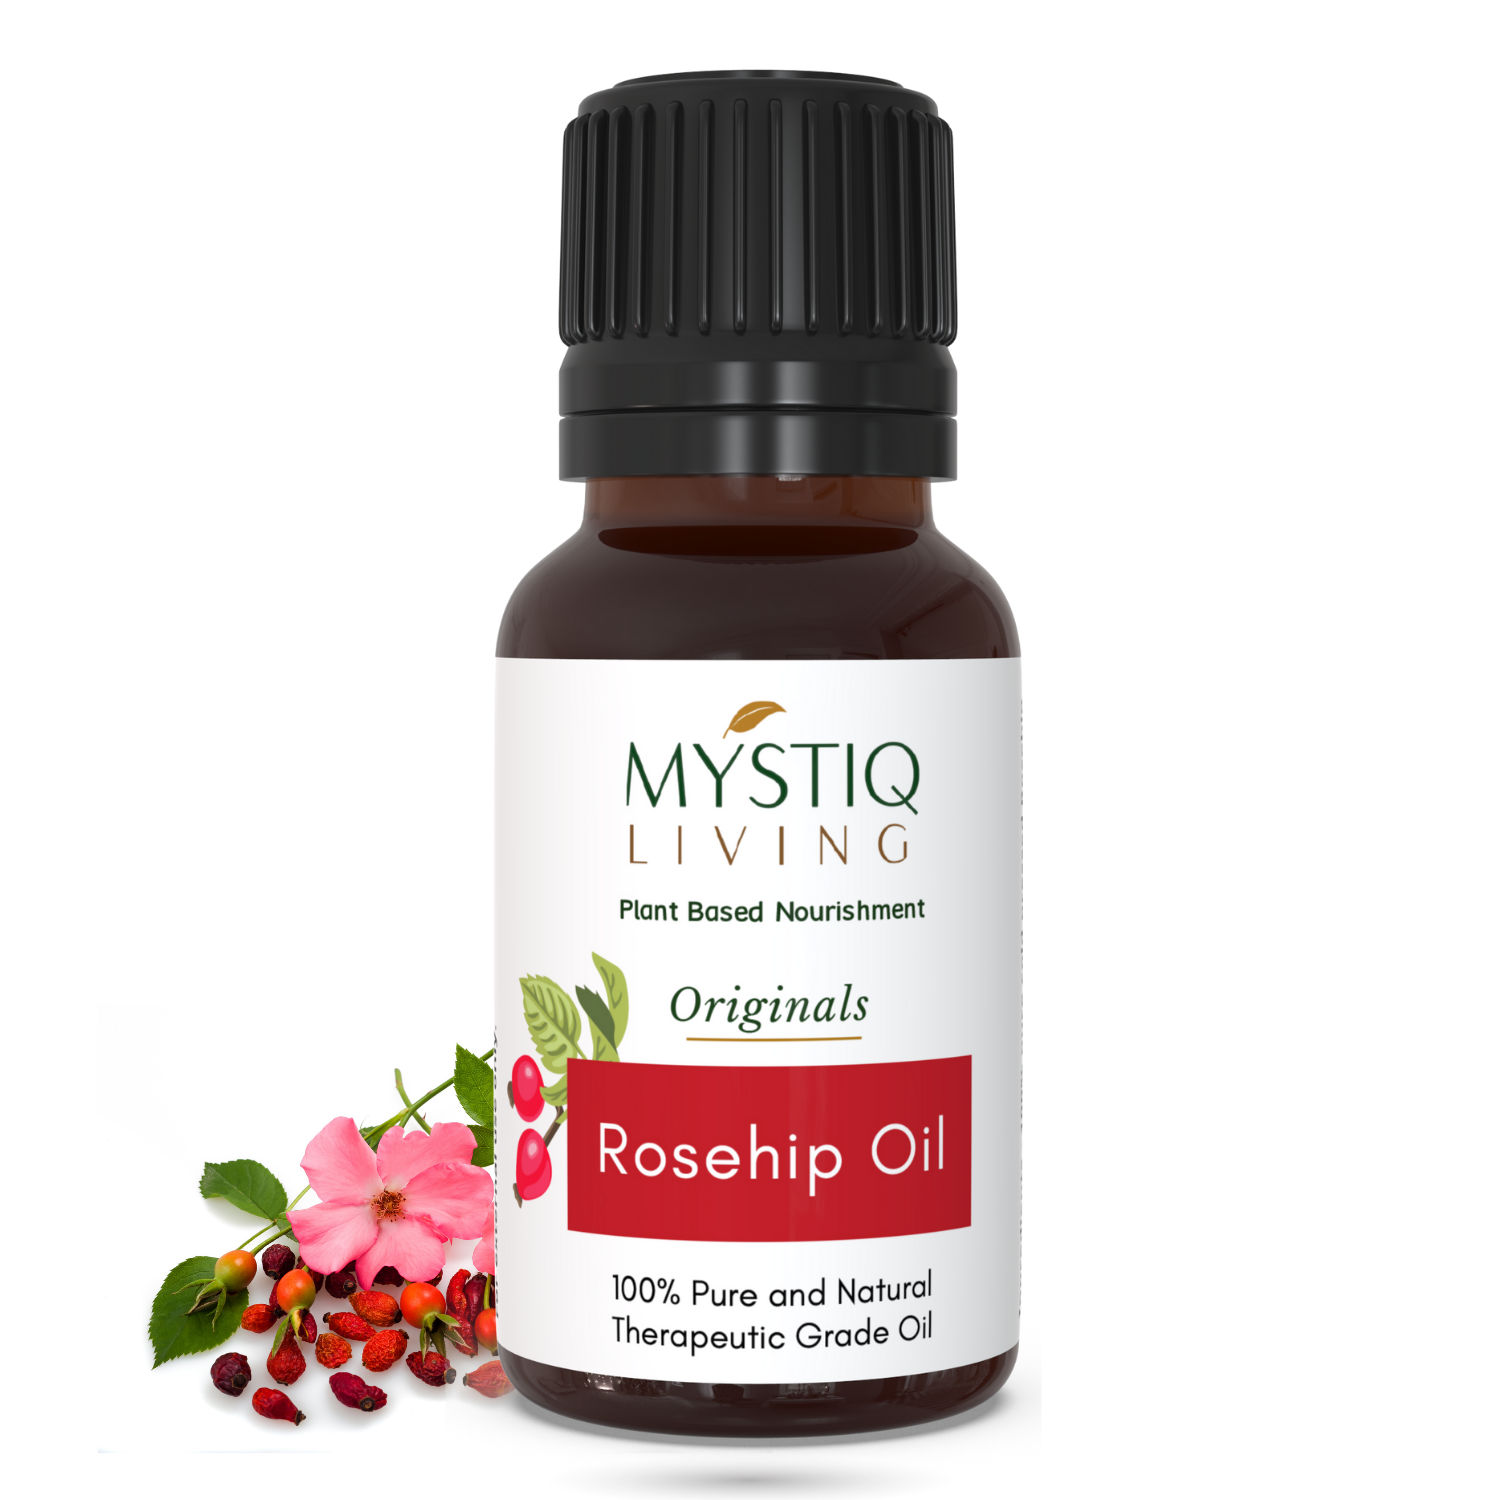 Rosehip Seed Oil | Cold Pressed Oil | Pure and Natural Oil for Hair and Skin - Mystiq Living